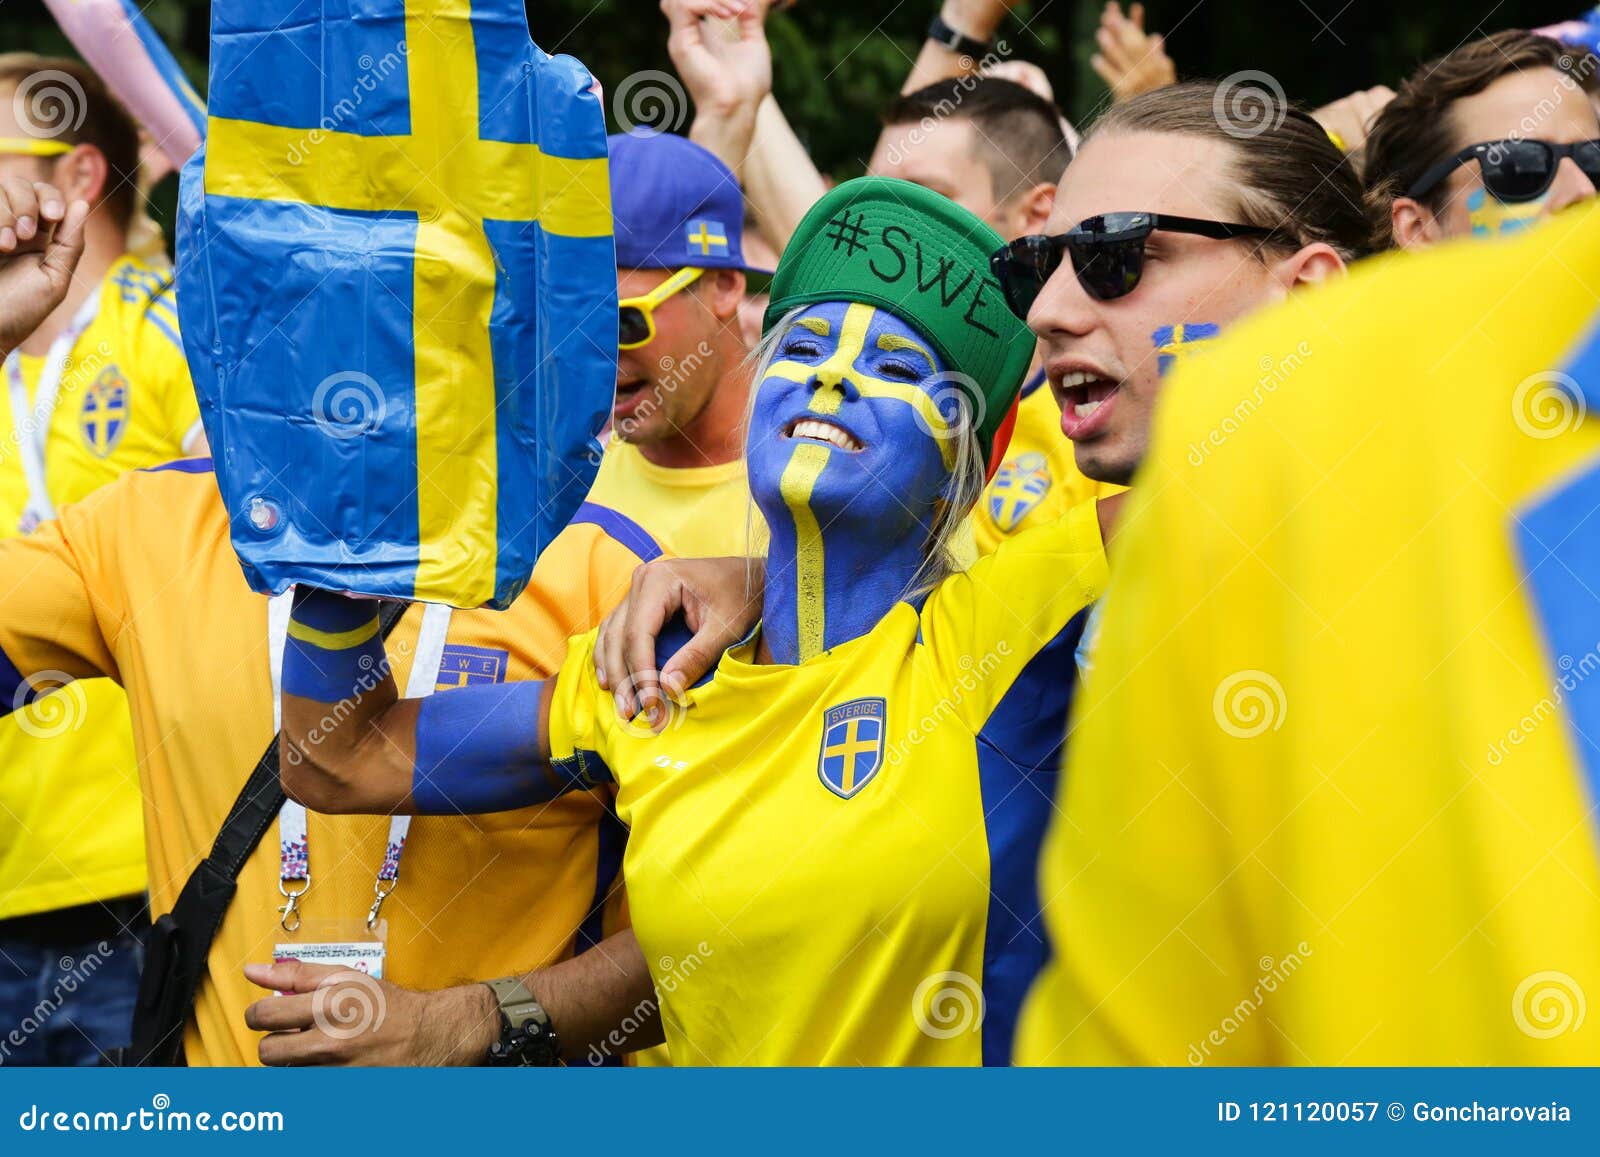 Swedish Fans Parade. People Singing and Dancing. Editorial Photography of fifa: 121120057